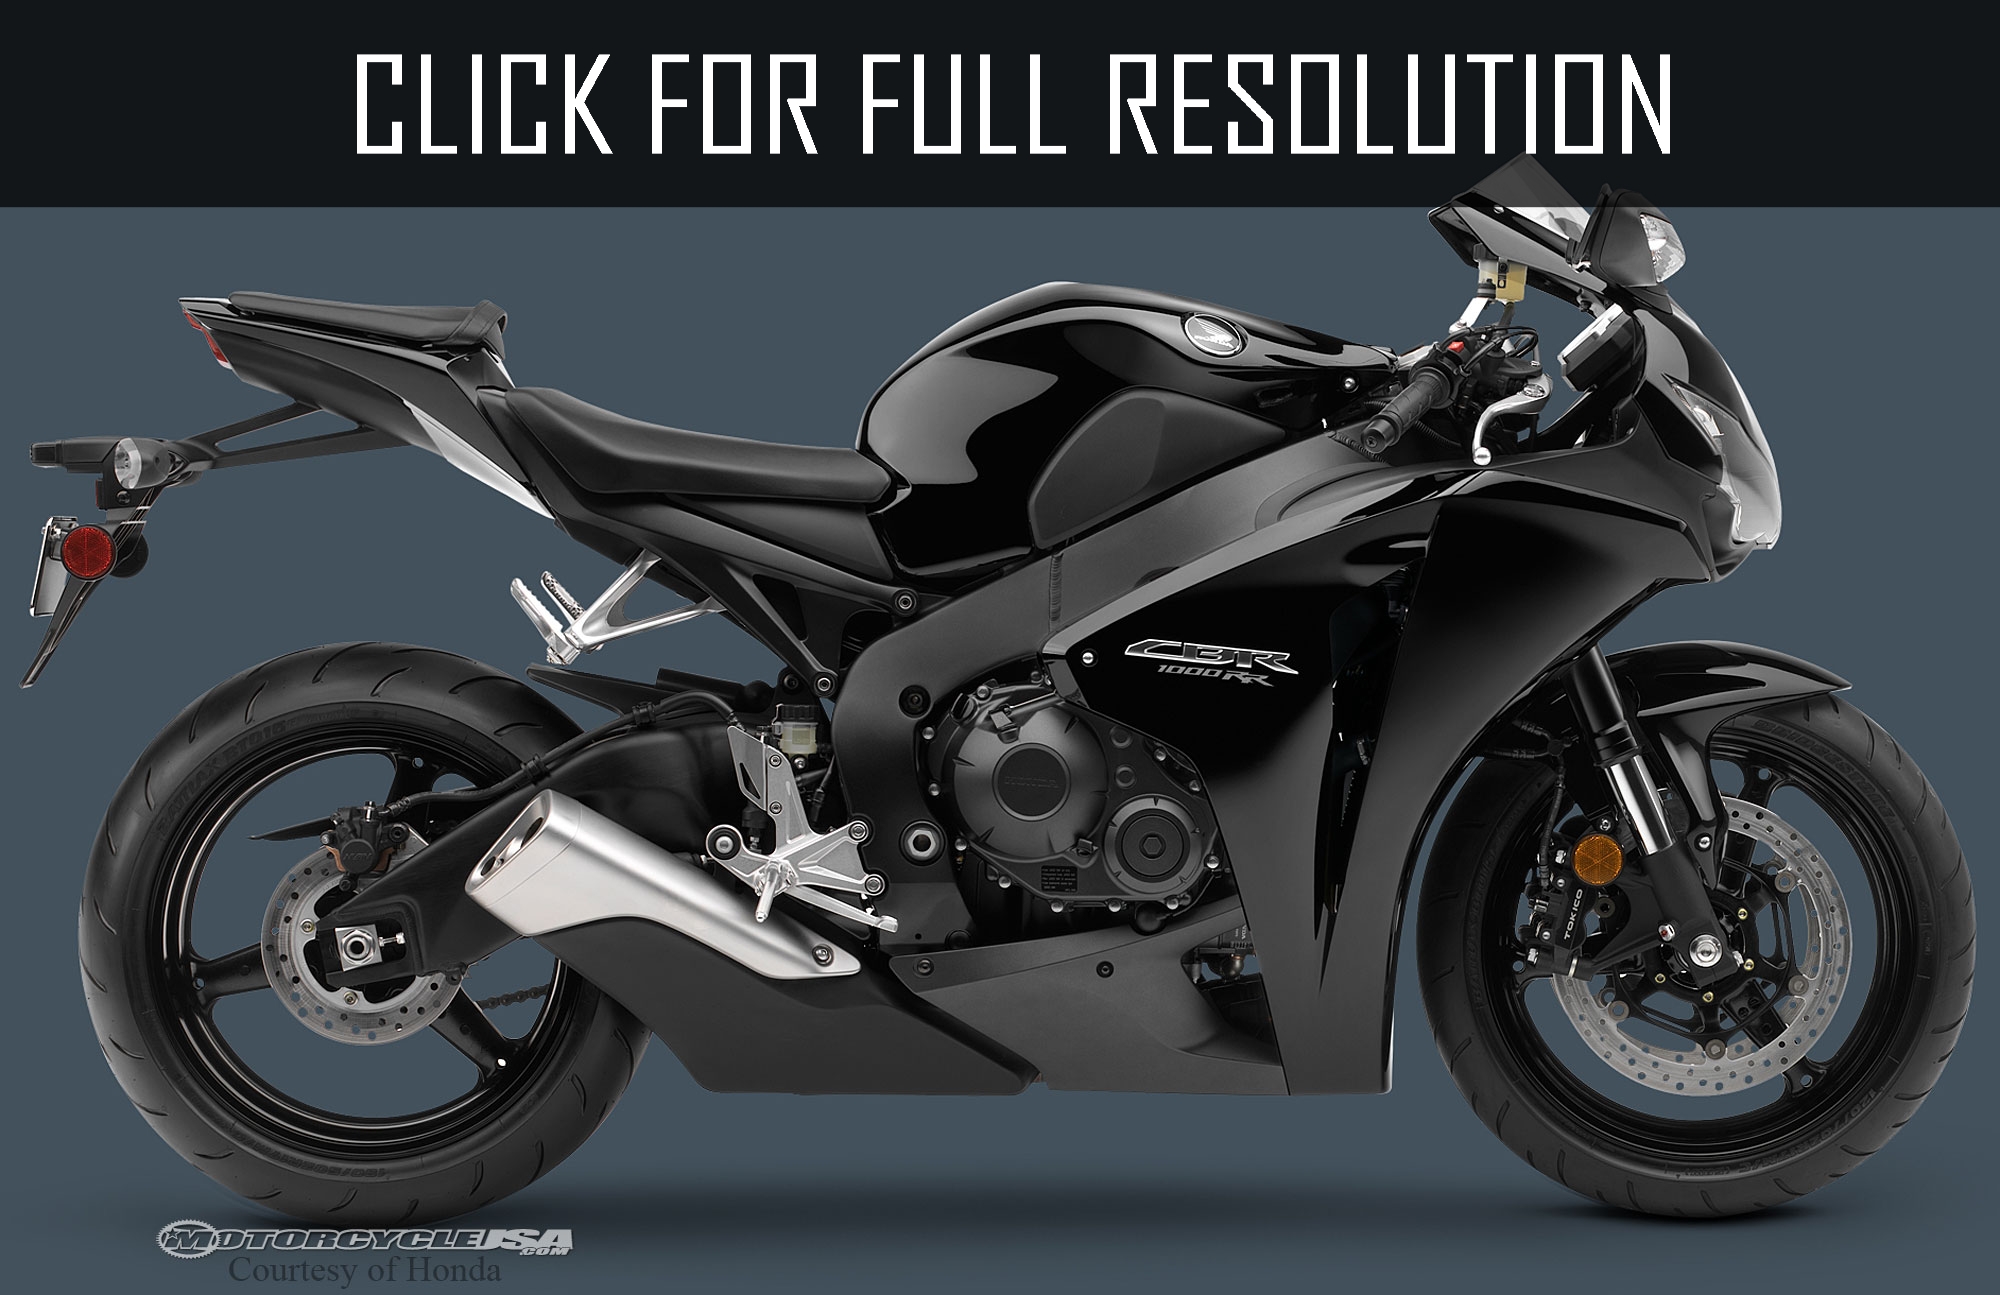 2009 Honda Cbr1000rr news, reviews, msrp, ratings with